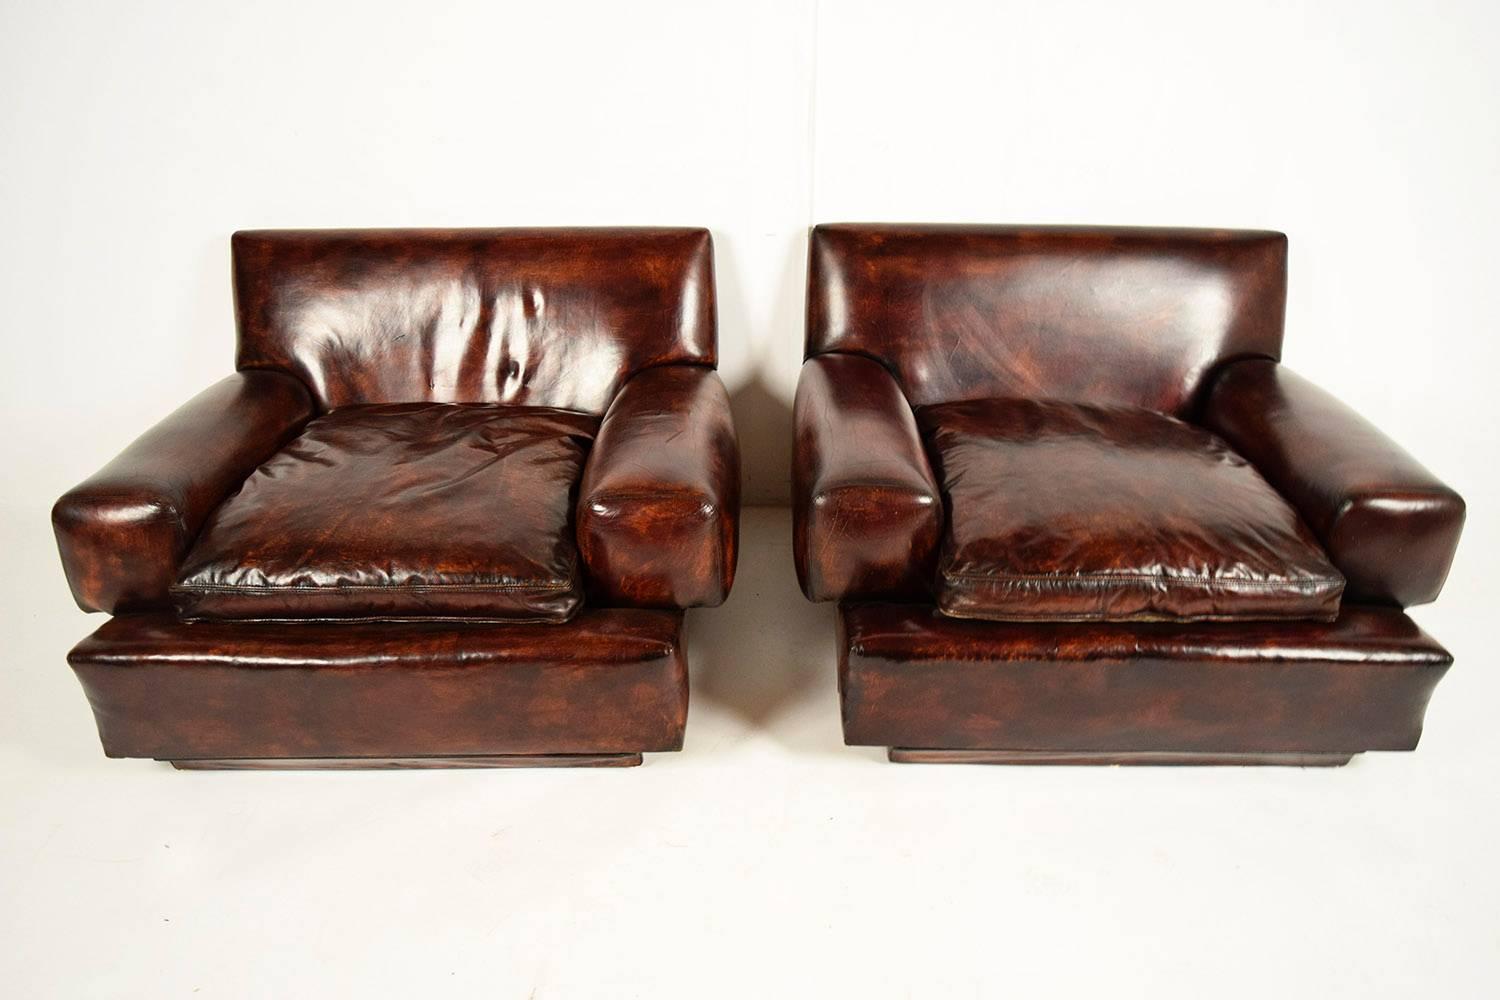 Pair of low 1960s modern leather club chairs. Wood frame, covered in dark brown leather with a beautiful distressed finish, showing amazing patina. Chairs have a loose cushion with matching color and distressed finish. Both chairs are solid and